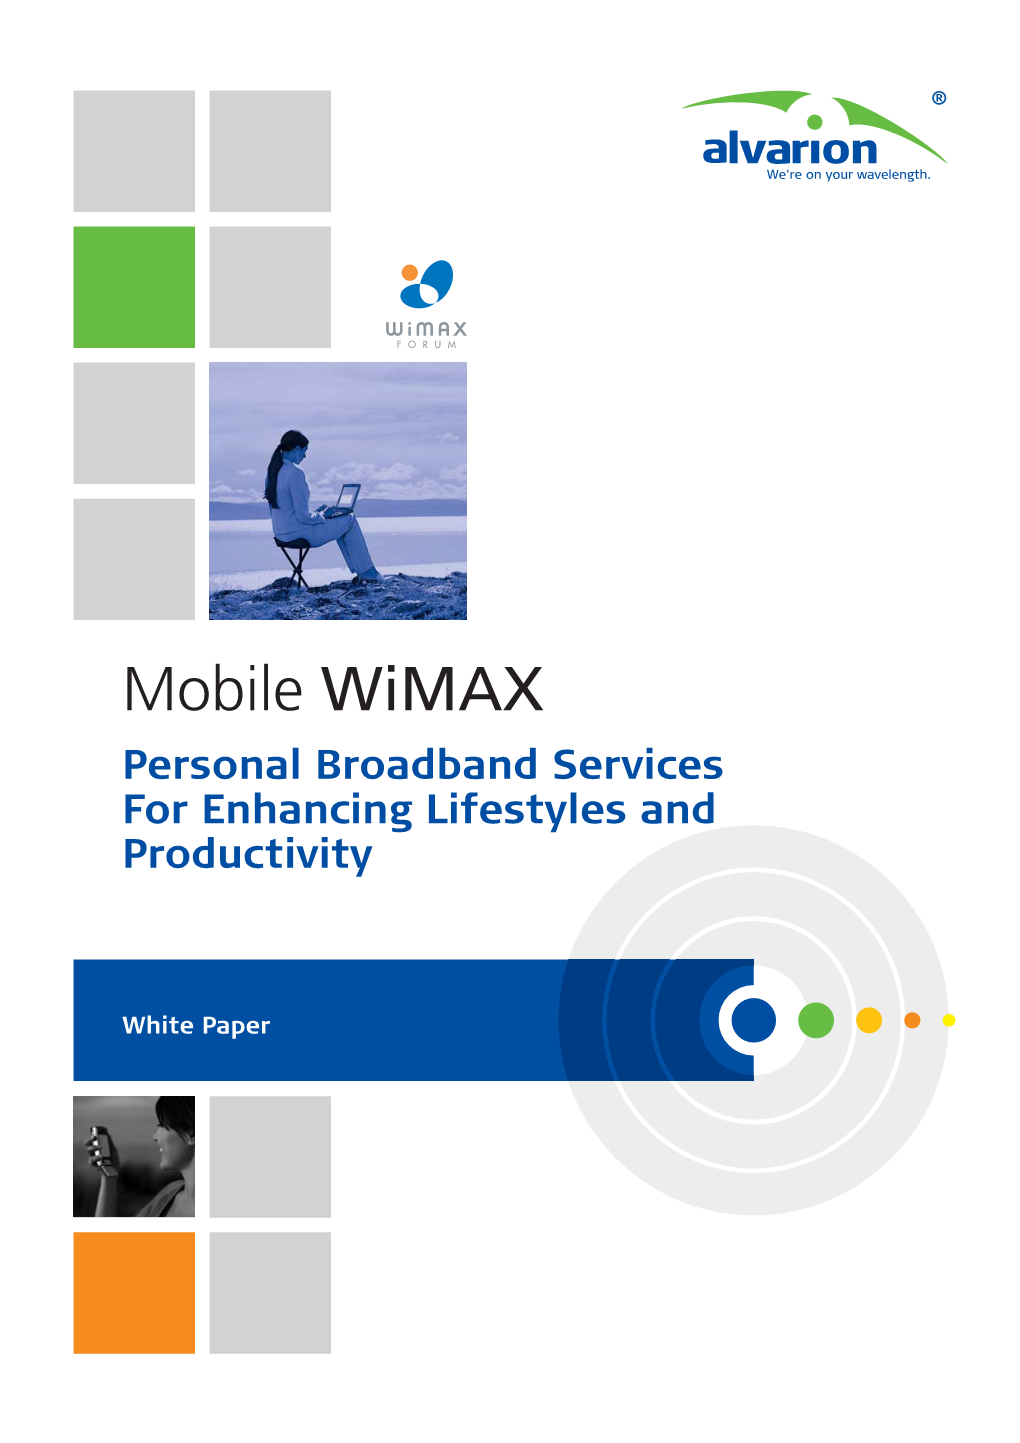 Mobile Wimax Personal Broadband Services for Enhancing Lifestyles and Productivity